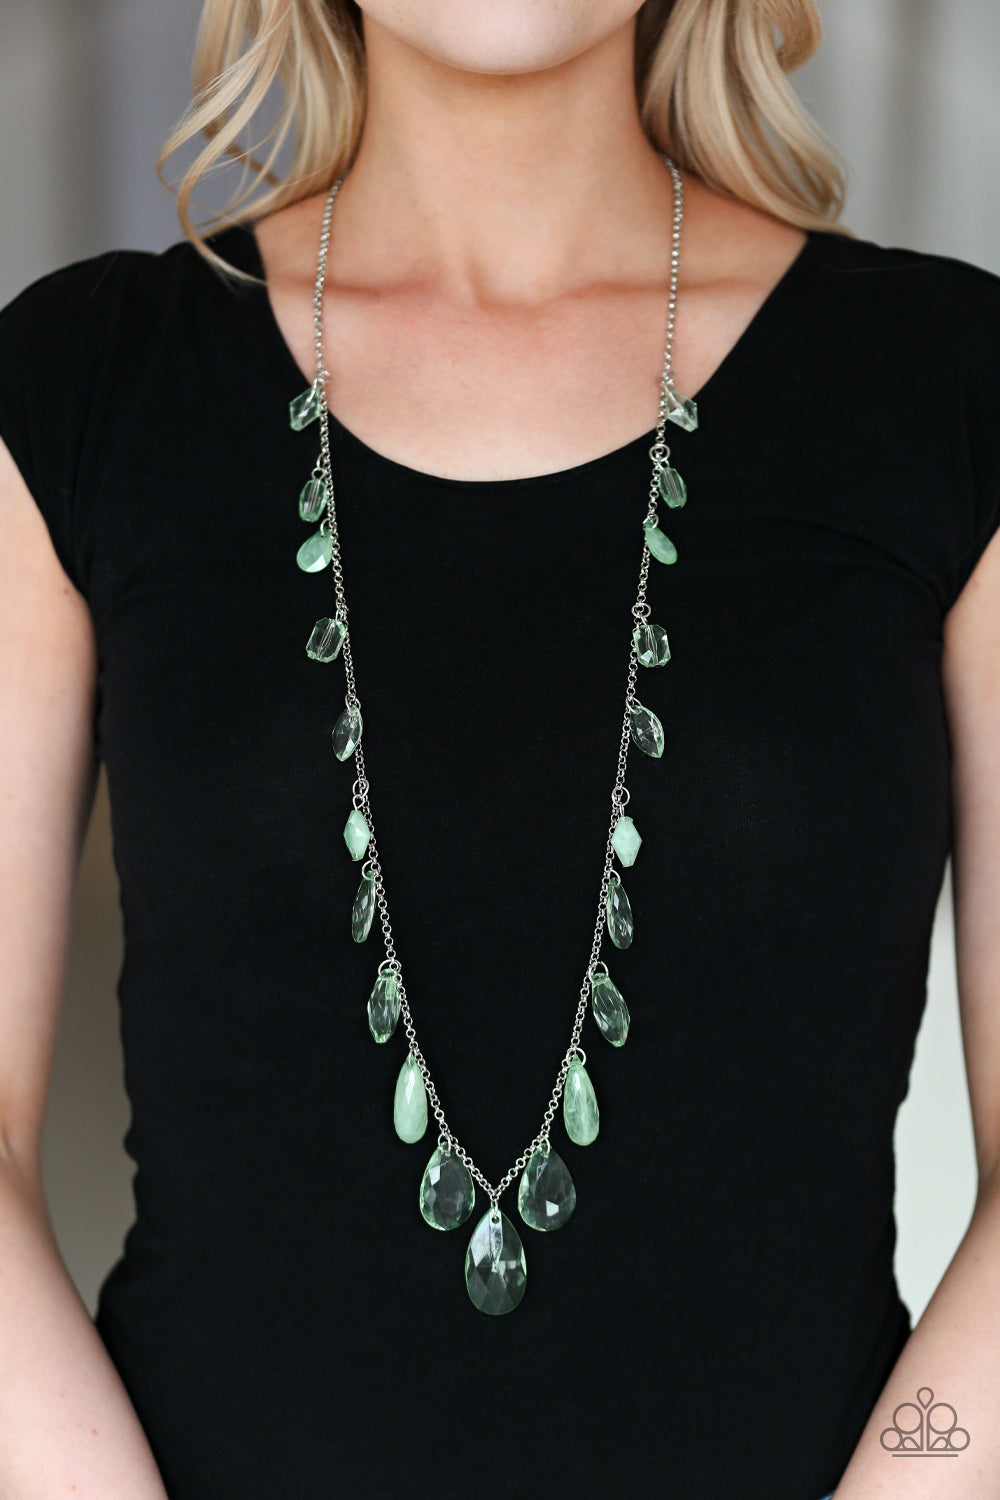 Paparazzi Necklaces - Glow and Steady Wins The Race - Green